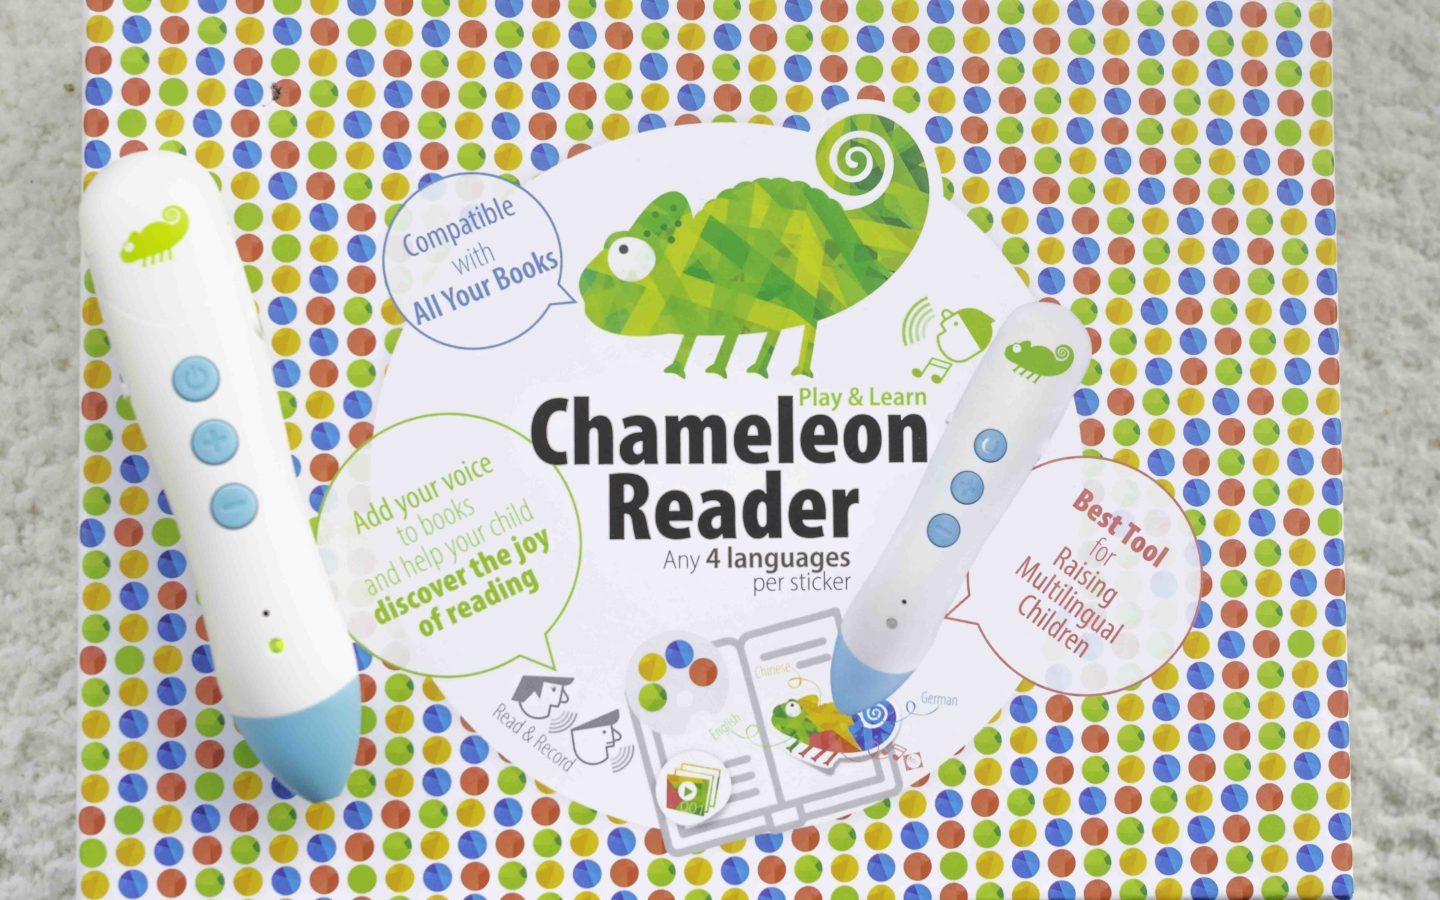 The Chameleon Reader set includes everything you need to get started.